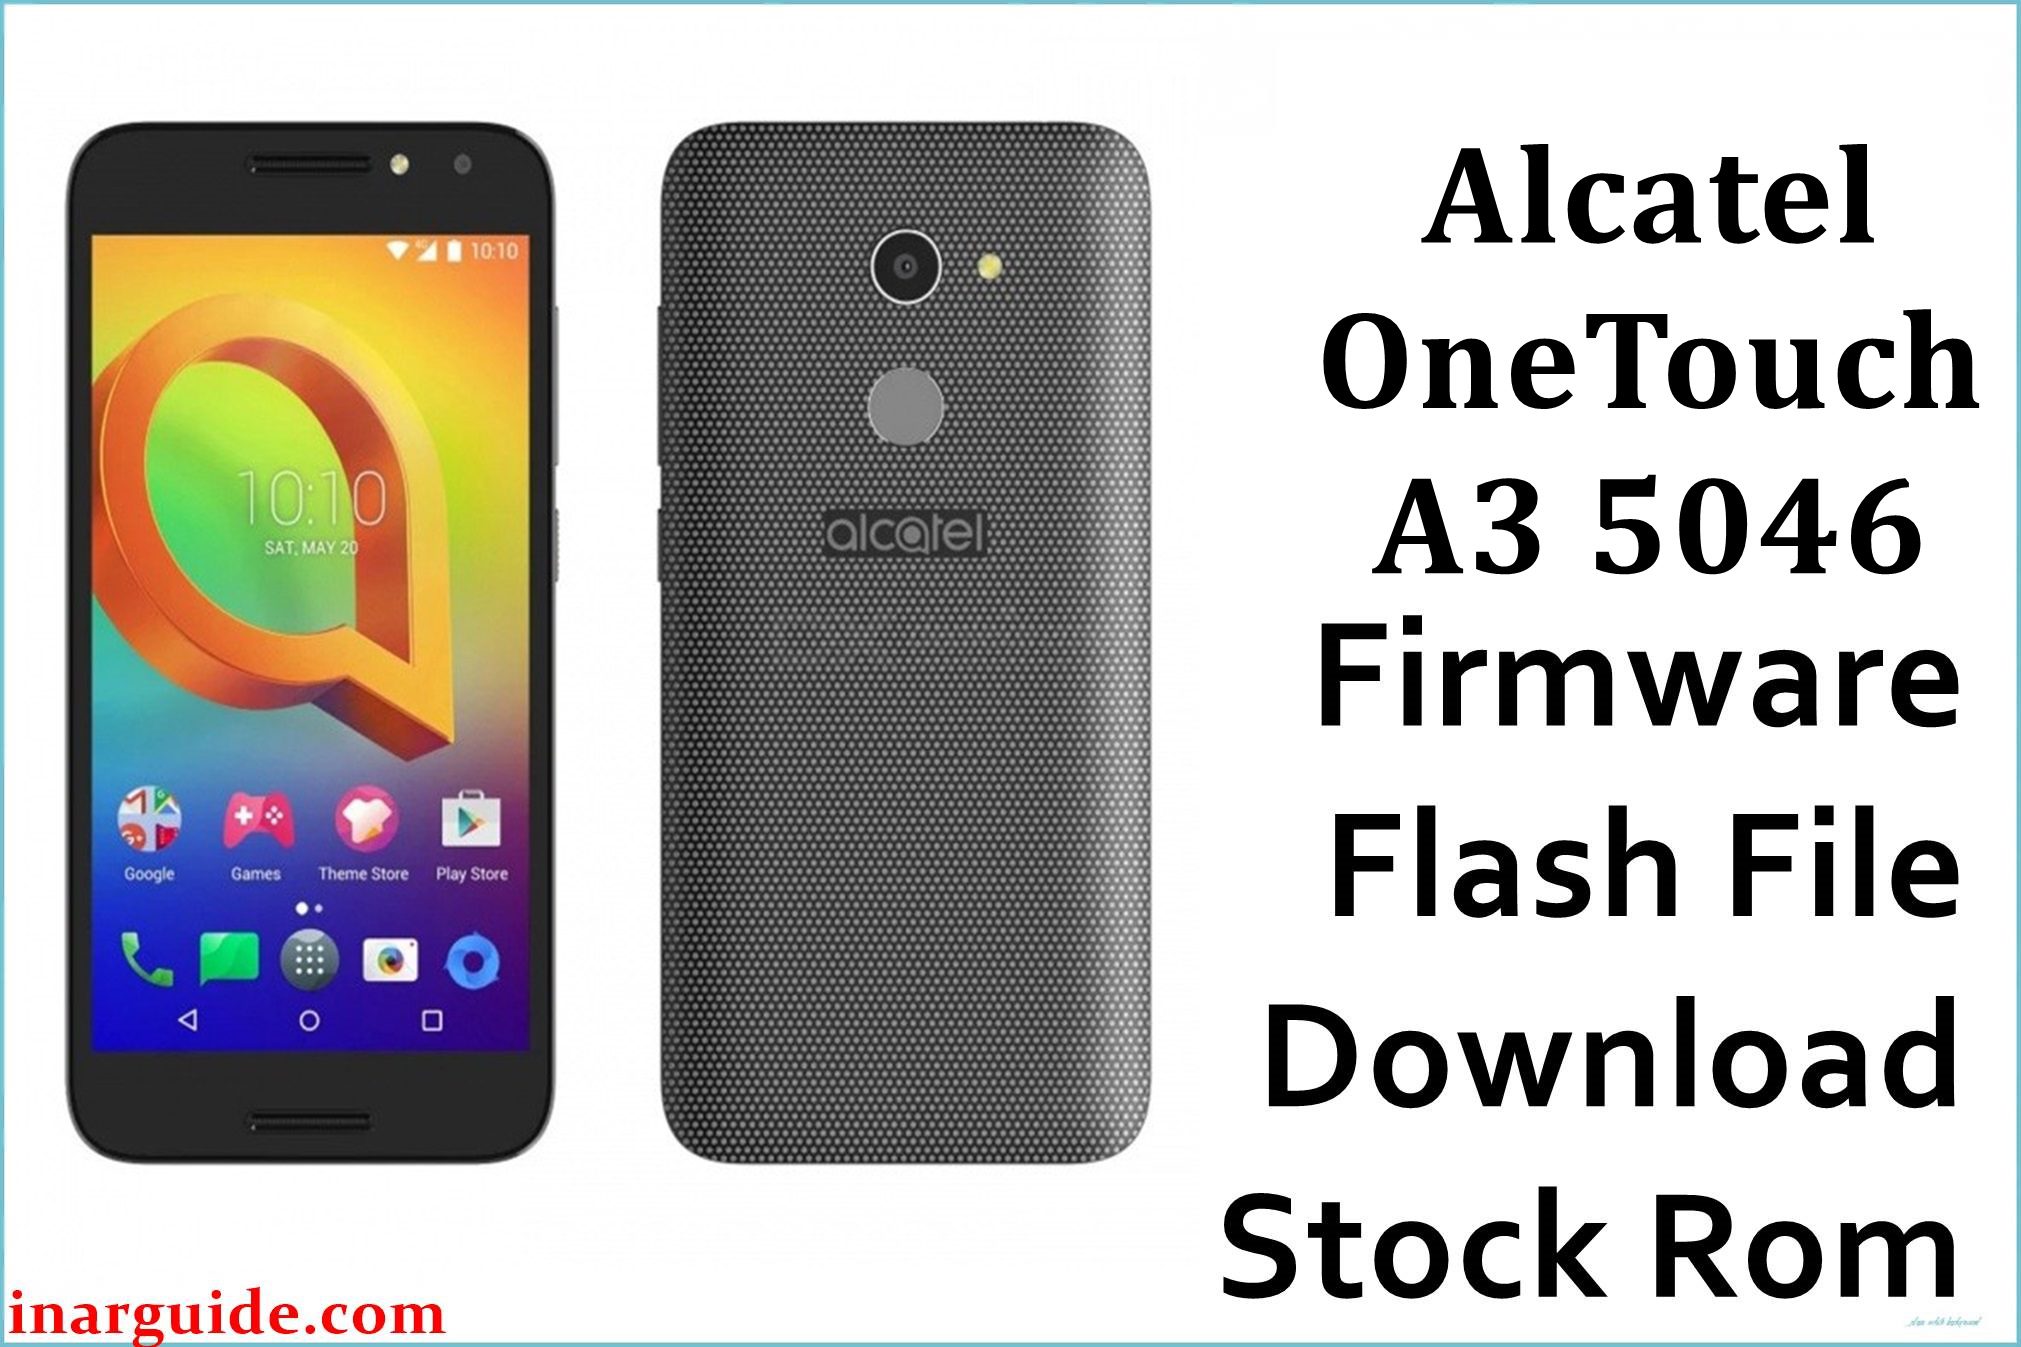 Alcatel OneTouch A3 5046